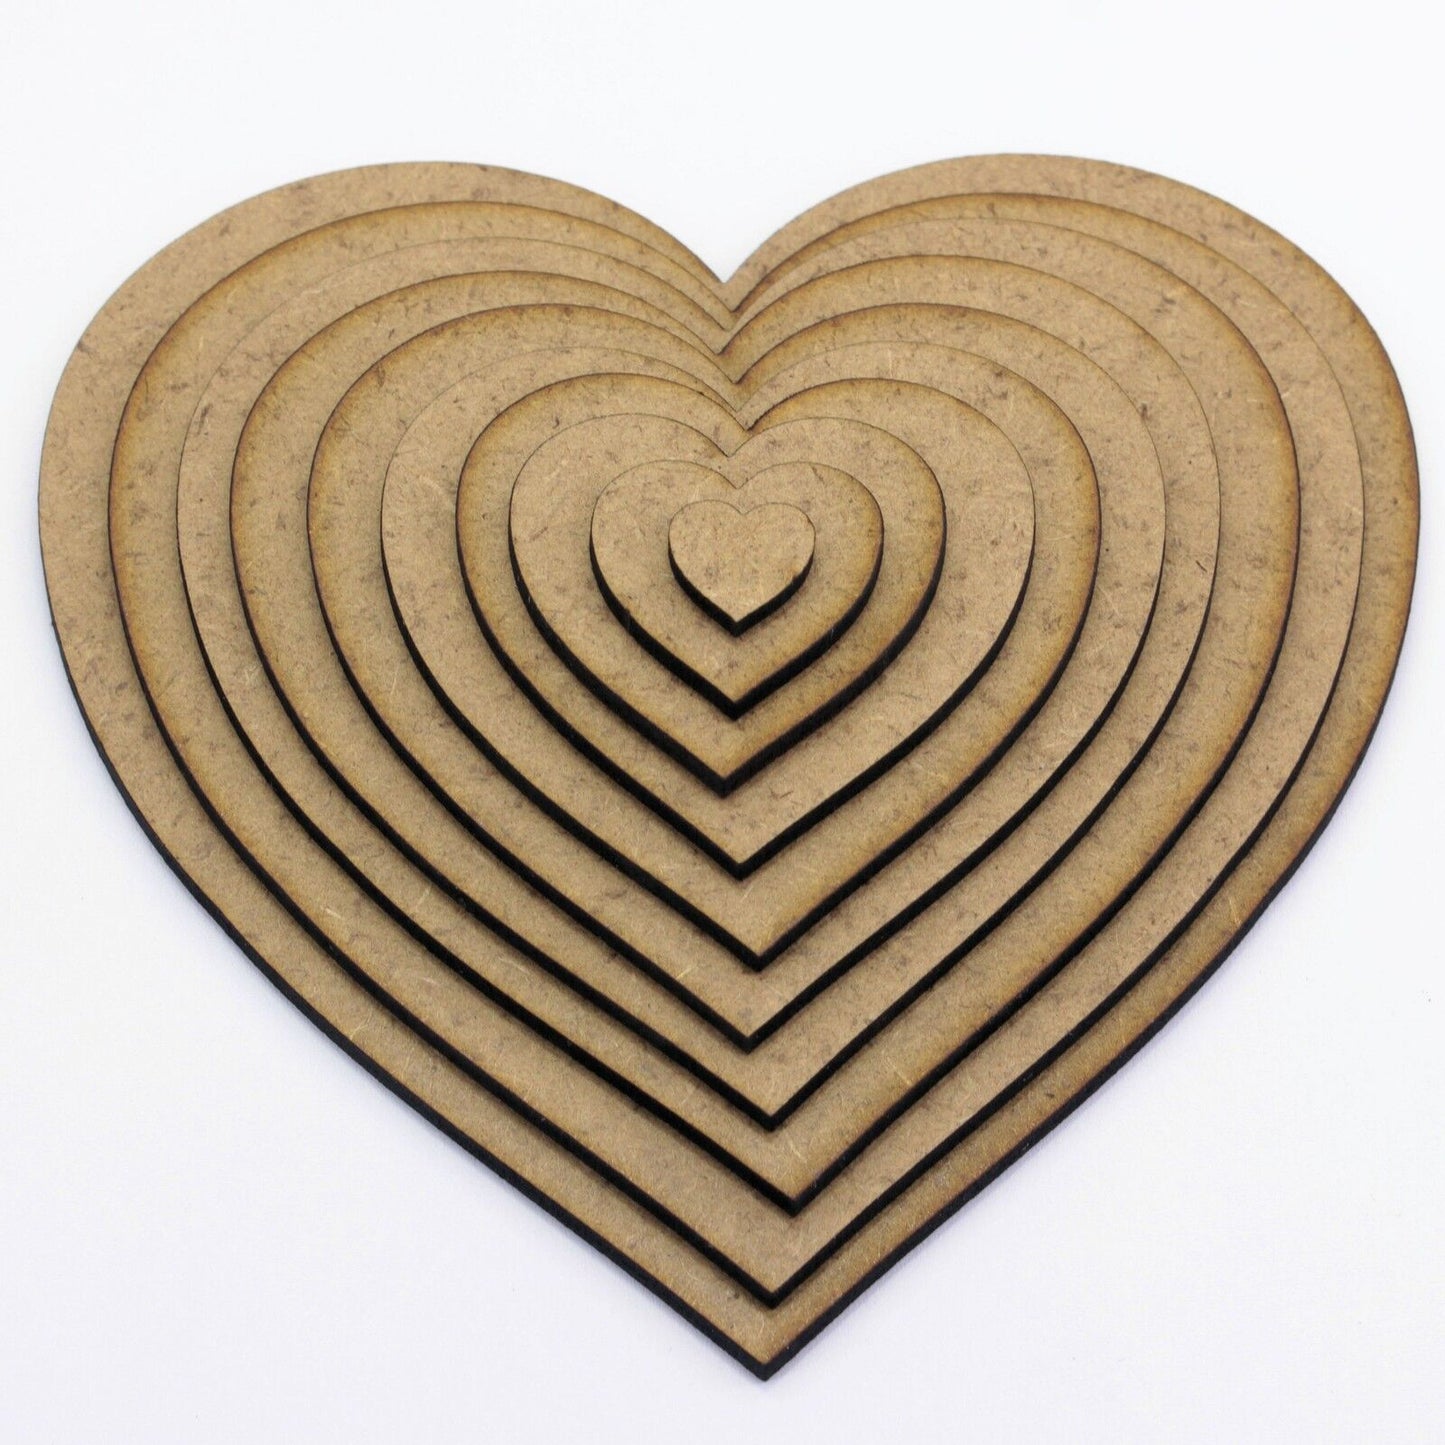 Love Heart Craft Shape, Embellishments, Tags, Decorations, 2mm MDF Wood Topper